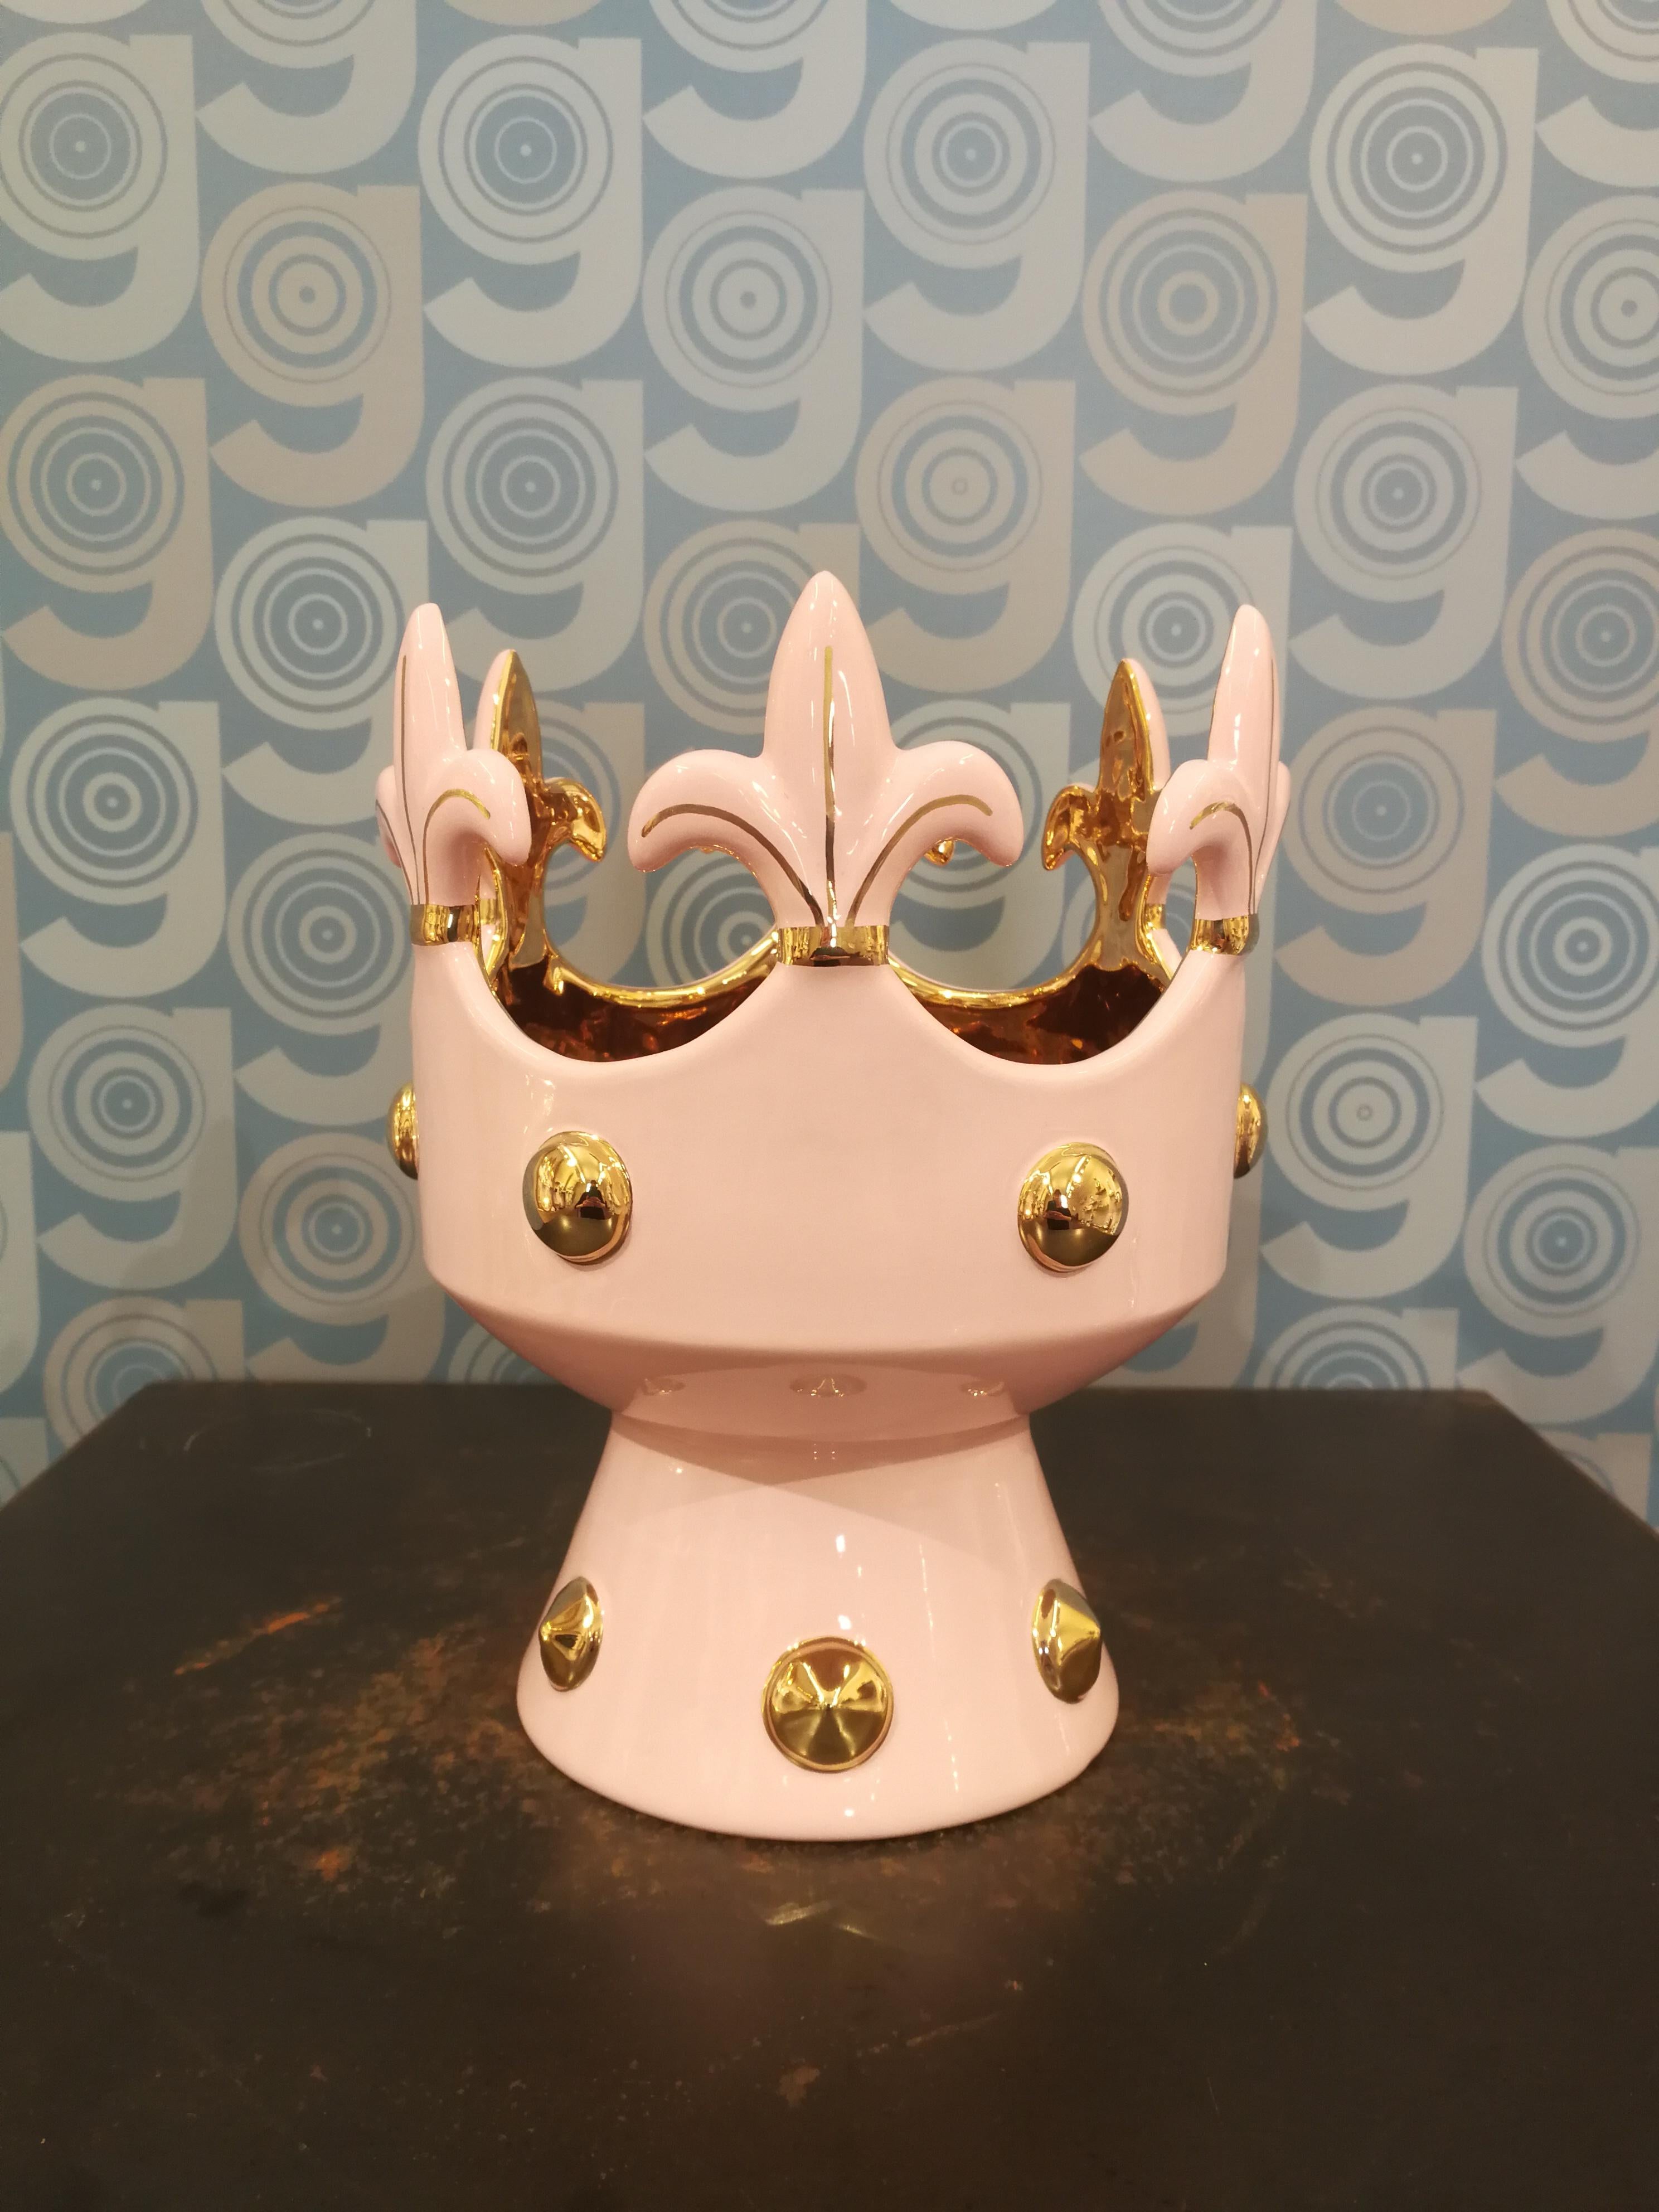 CARLA CORONA elegant cup or centerpiece in ceramic, forged on the lathe and hand painted. The inside of the crown is entirely painted in pure gold, while the outside is presented in a delicate light pink colour. The crown is modeled in the upper